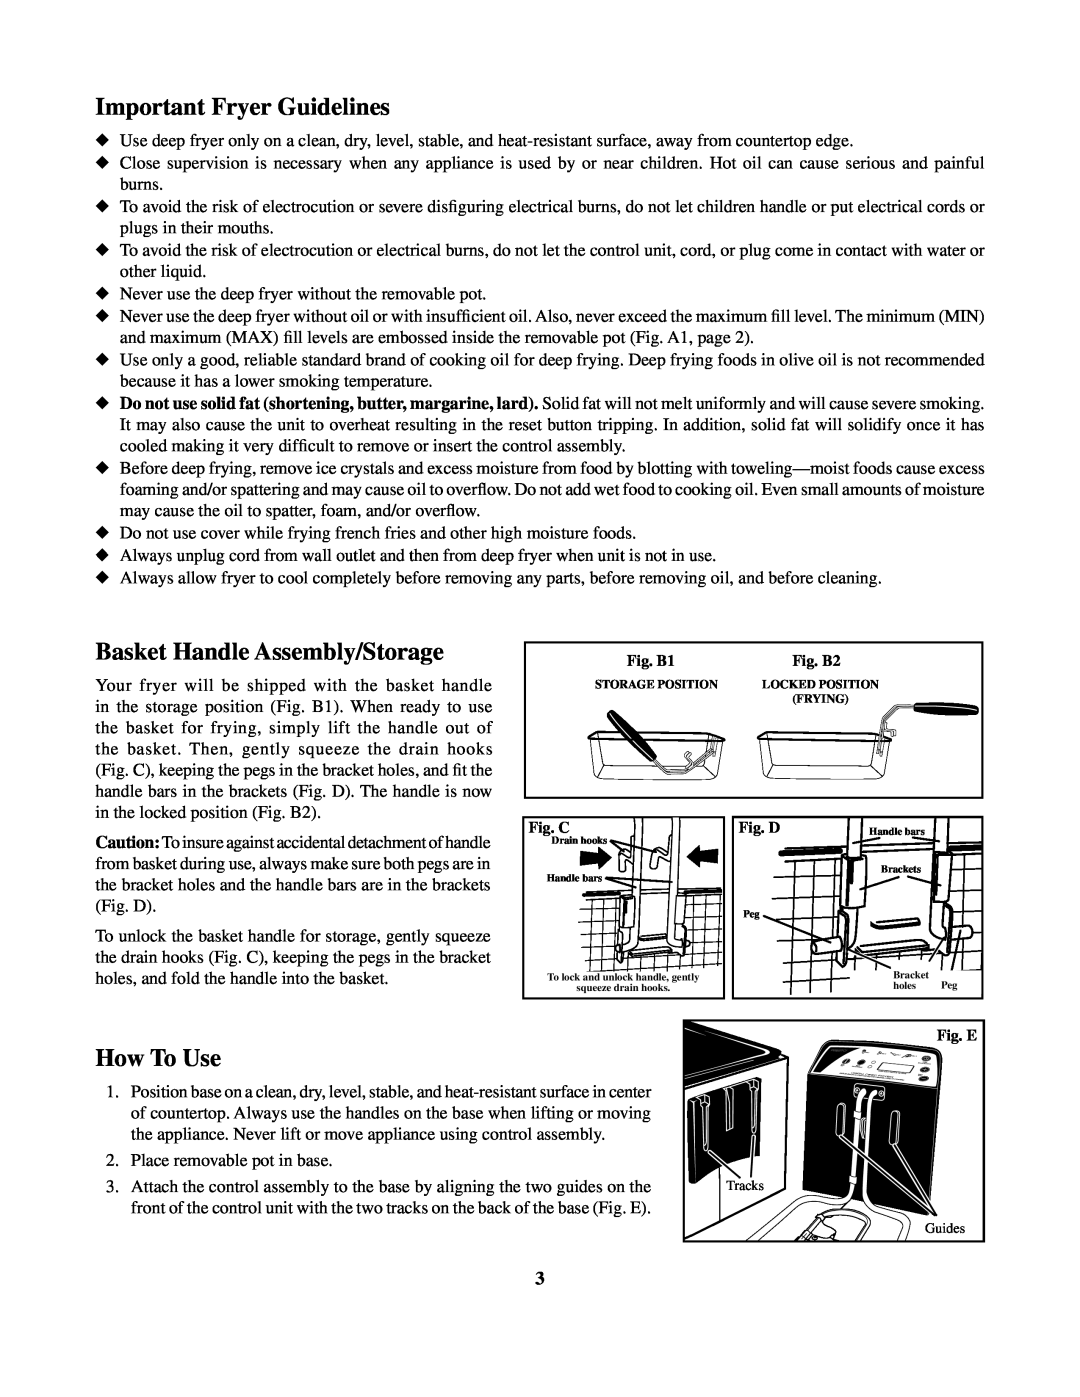 Presto Digital ProFry manual Important Fryer Guidelines, Basket Handle Assembly/Storage, How To Use 